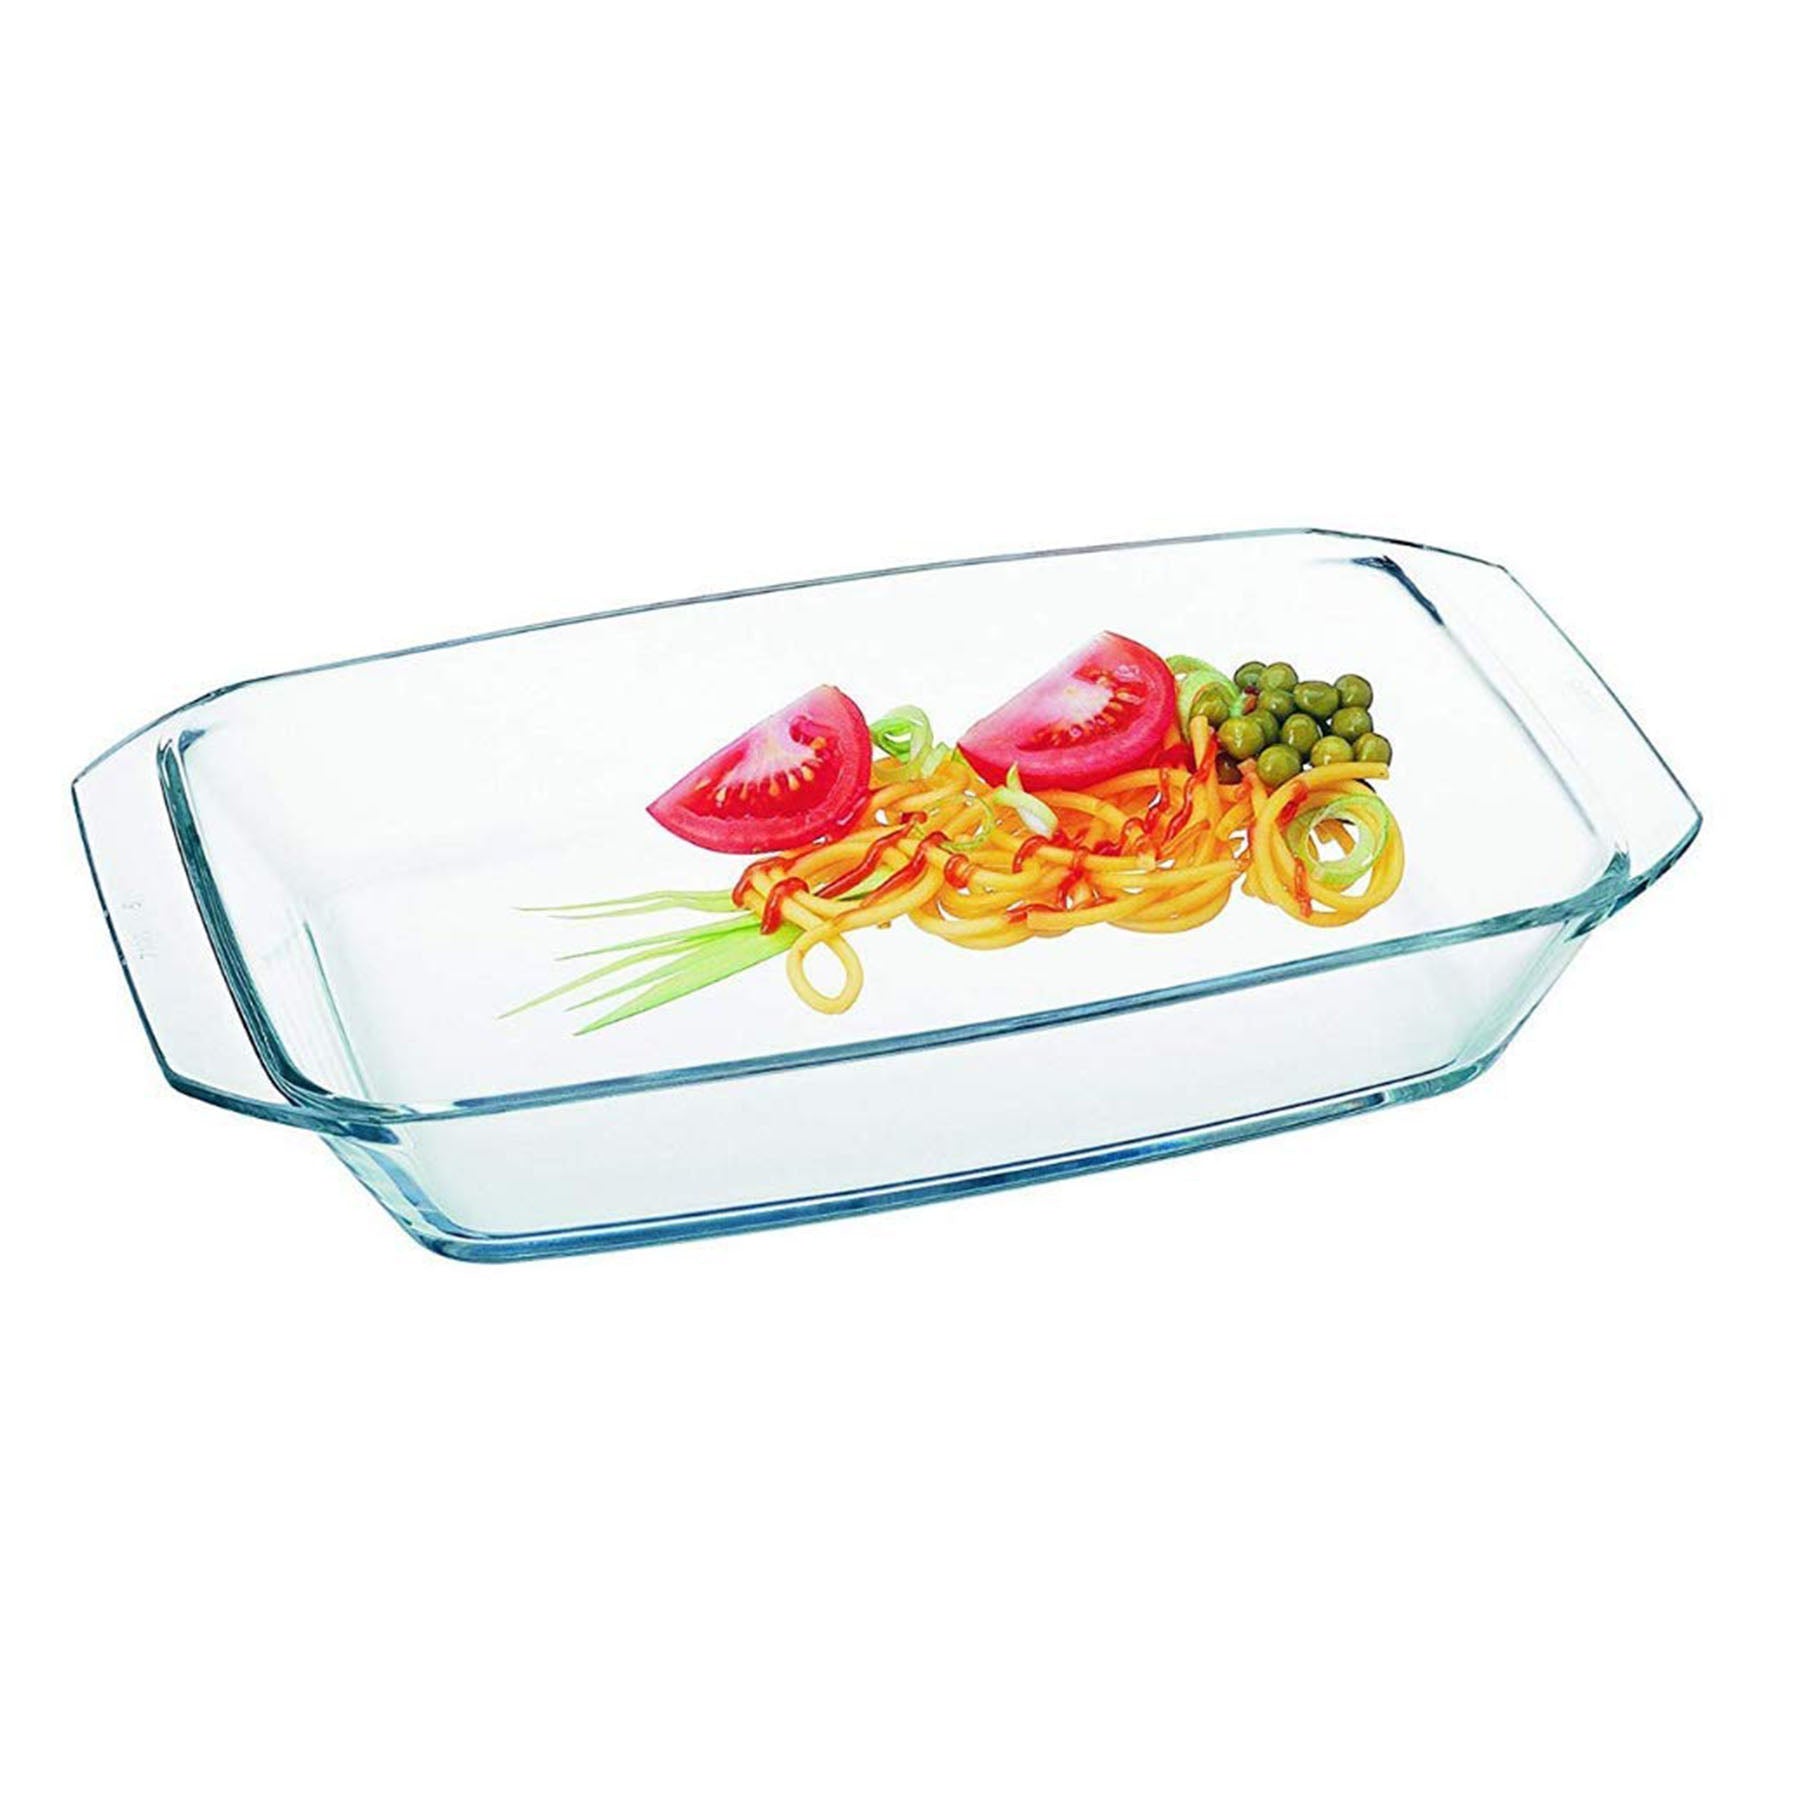 Rectangular Roaster with Handles, Clear